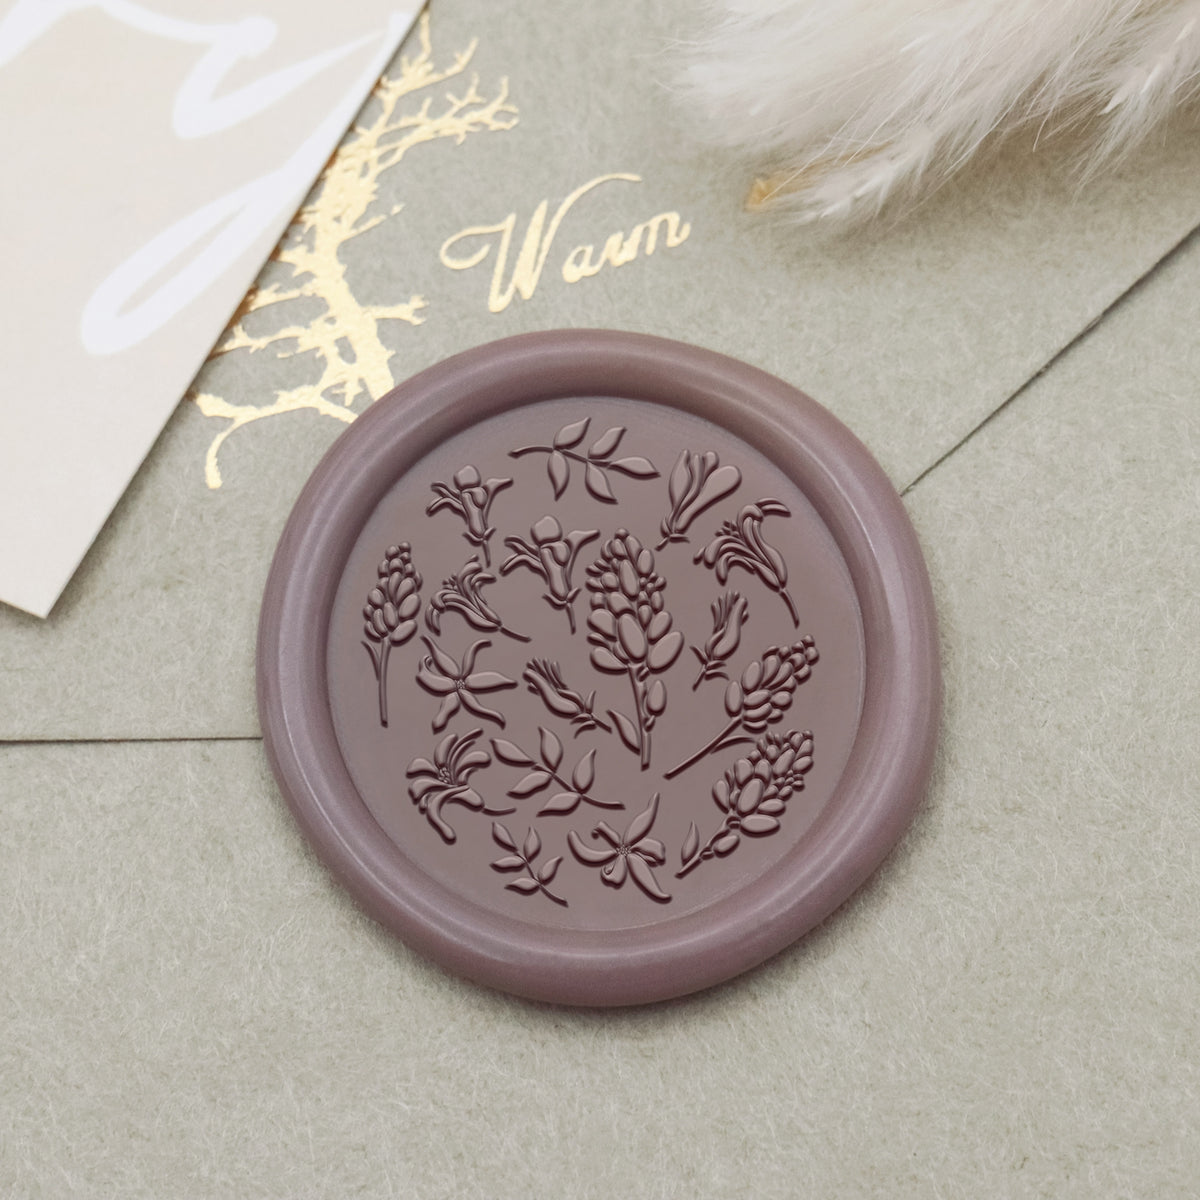 Floral Tile Pattern Wax Seal Stamp - Style 3 1